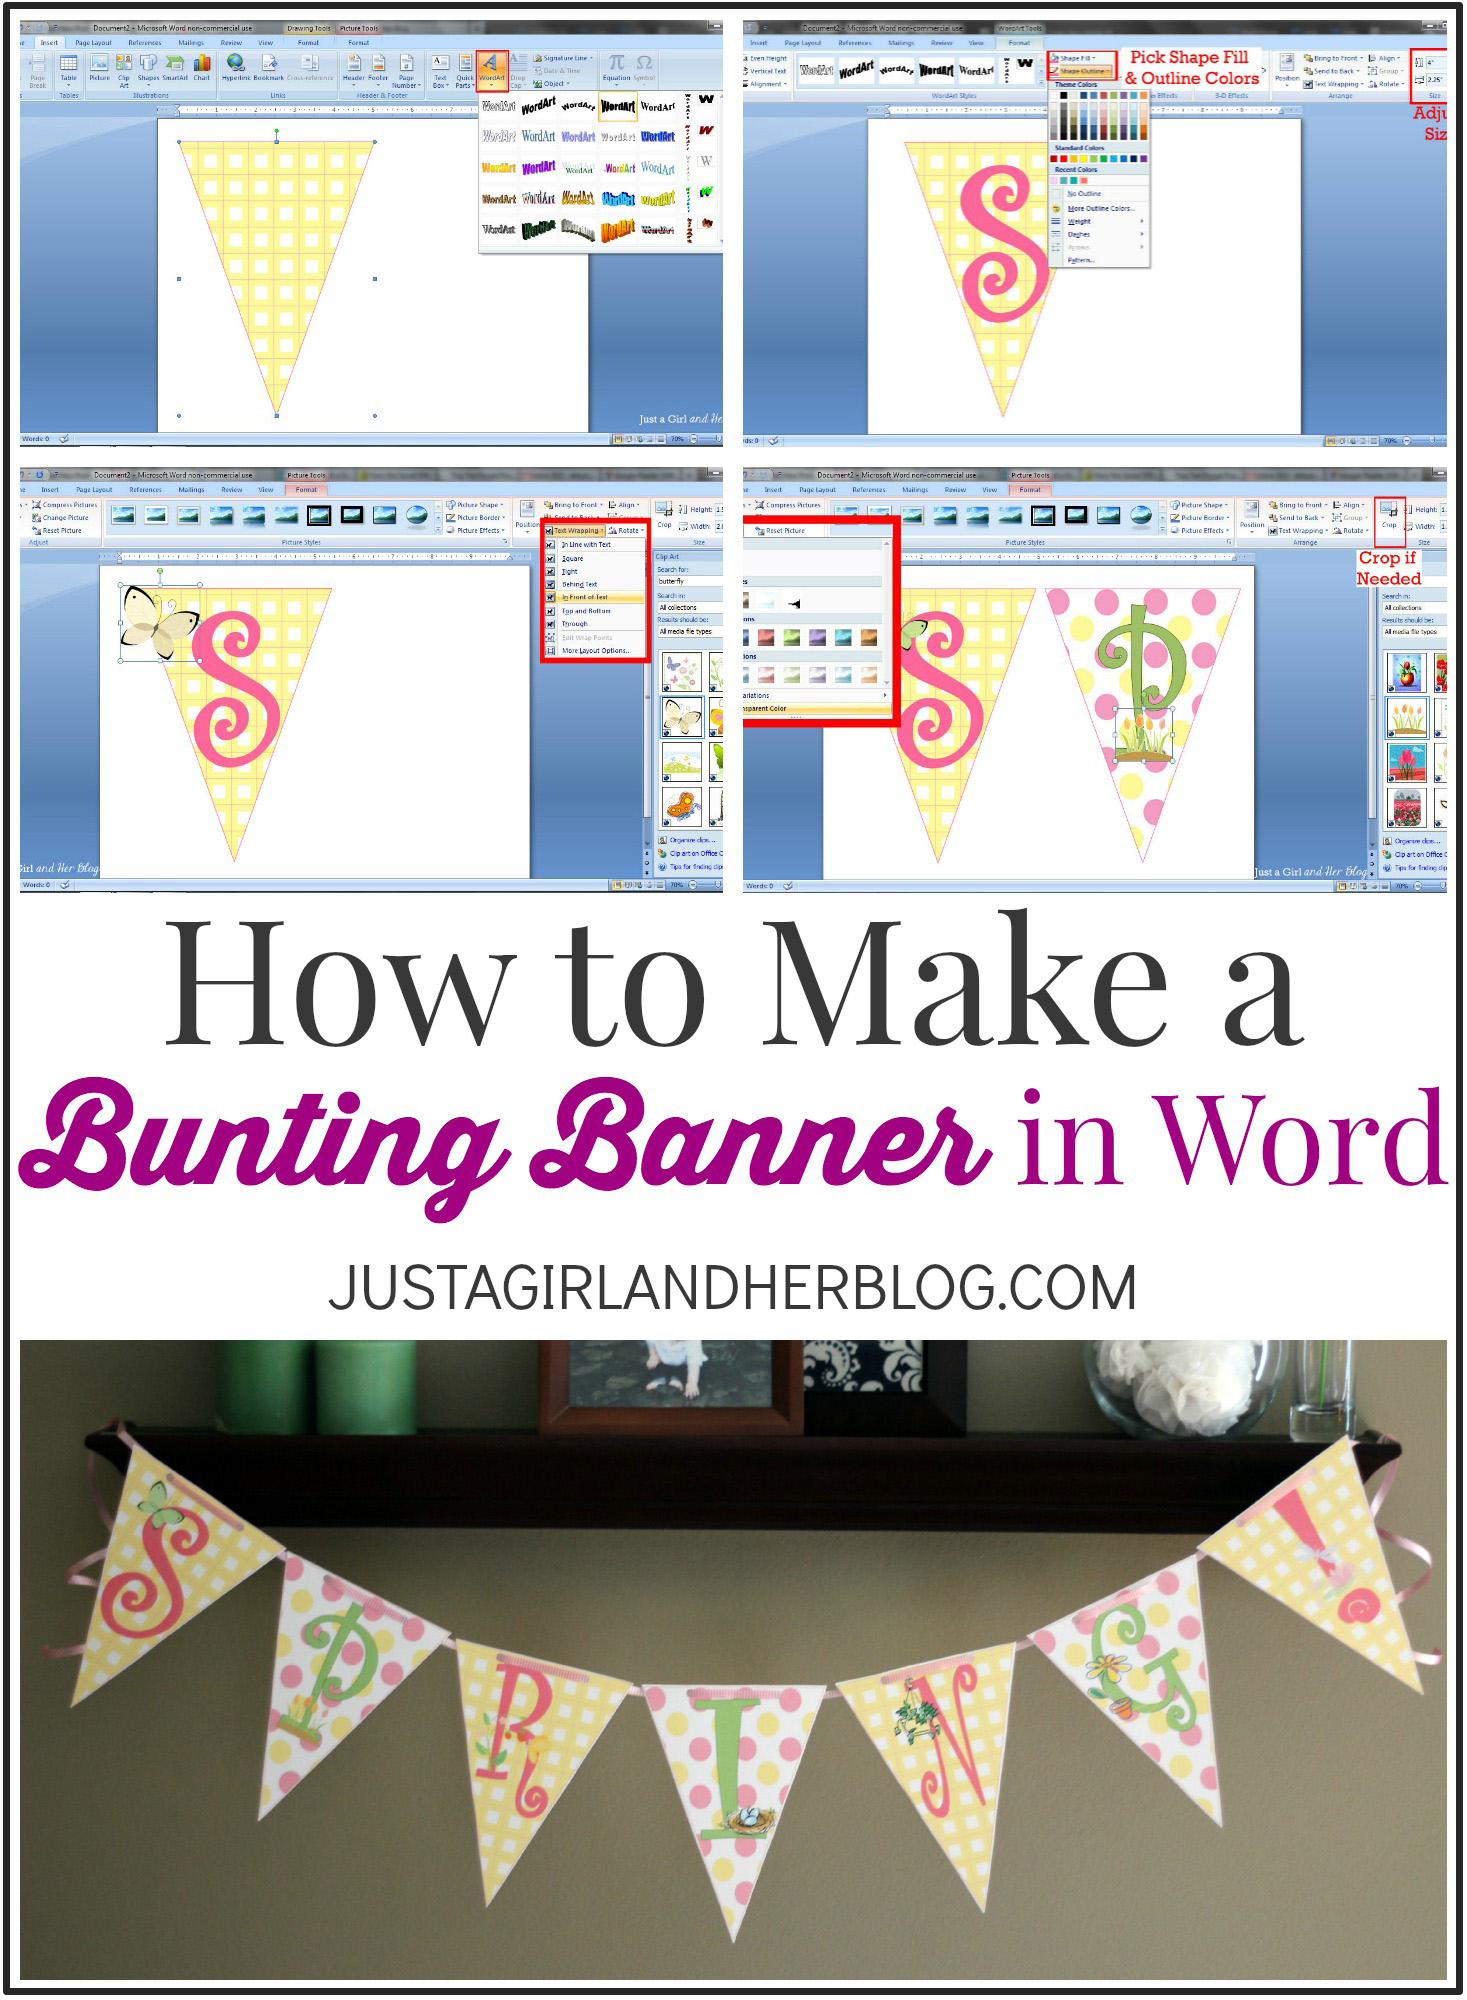 How To Make A Bunting Banner In Word {With Clip Art Tips And Tricks} - Free Printable Banner Maker